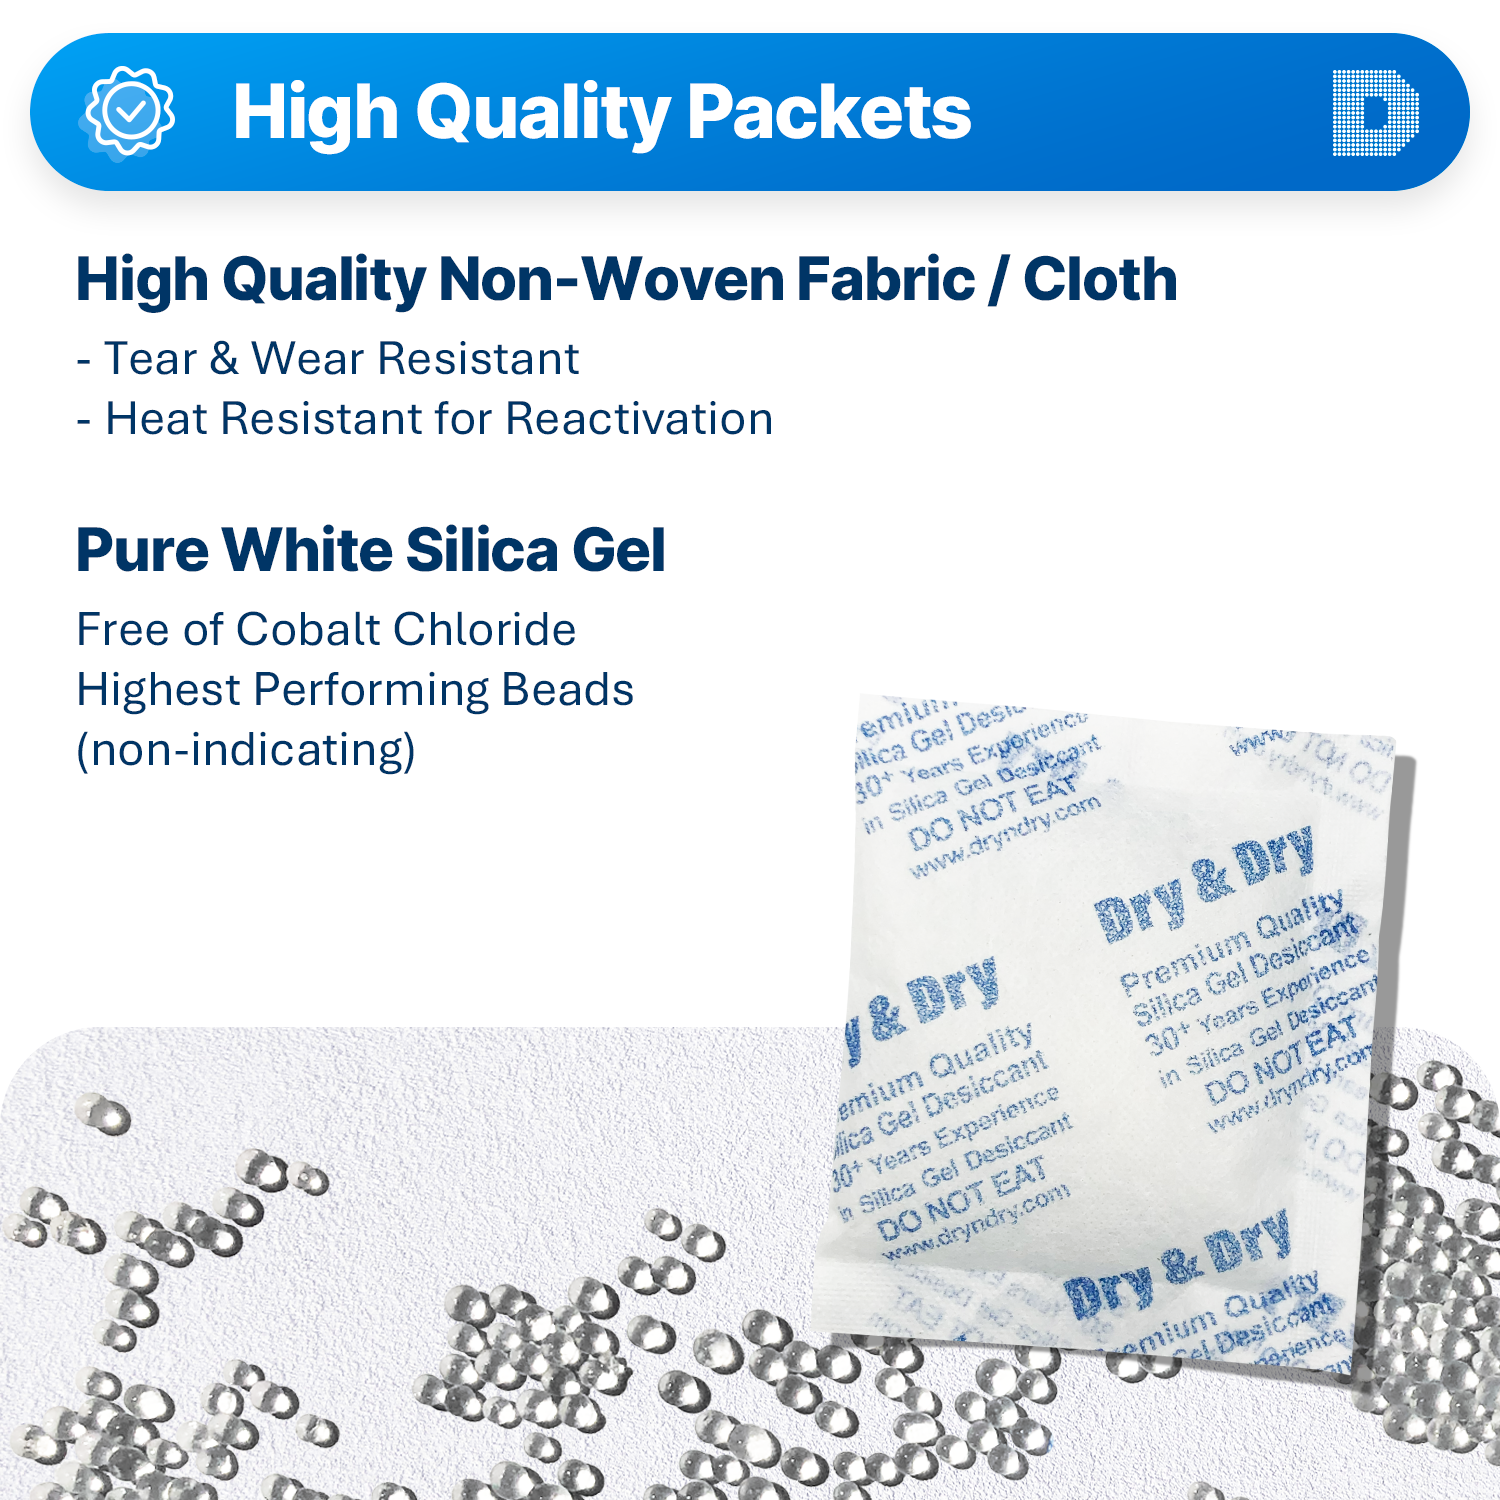 50 Gram [400 Packets]  "Dry & Dry" Premium Silica Gel Desiccant Packets - Rechargeable Fabric